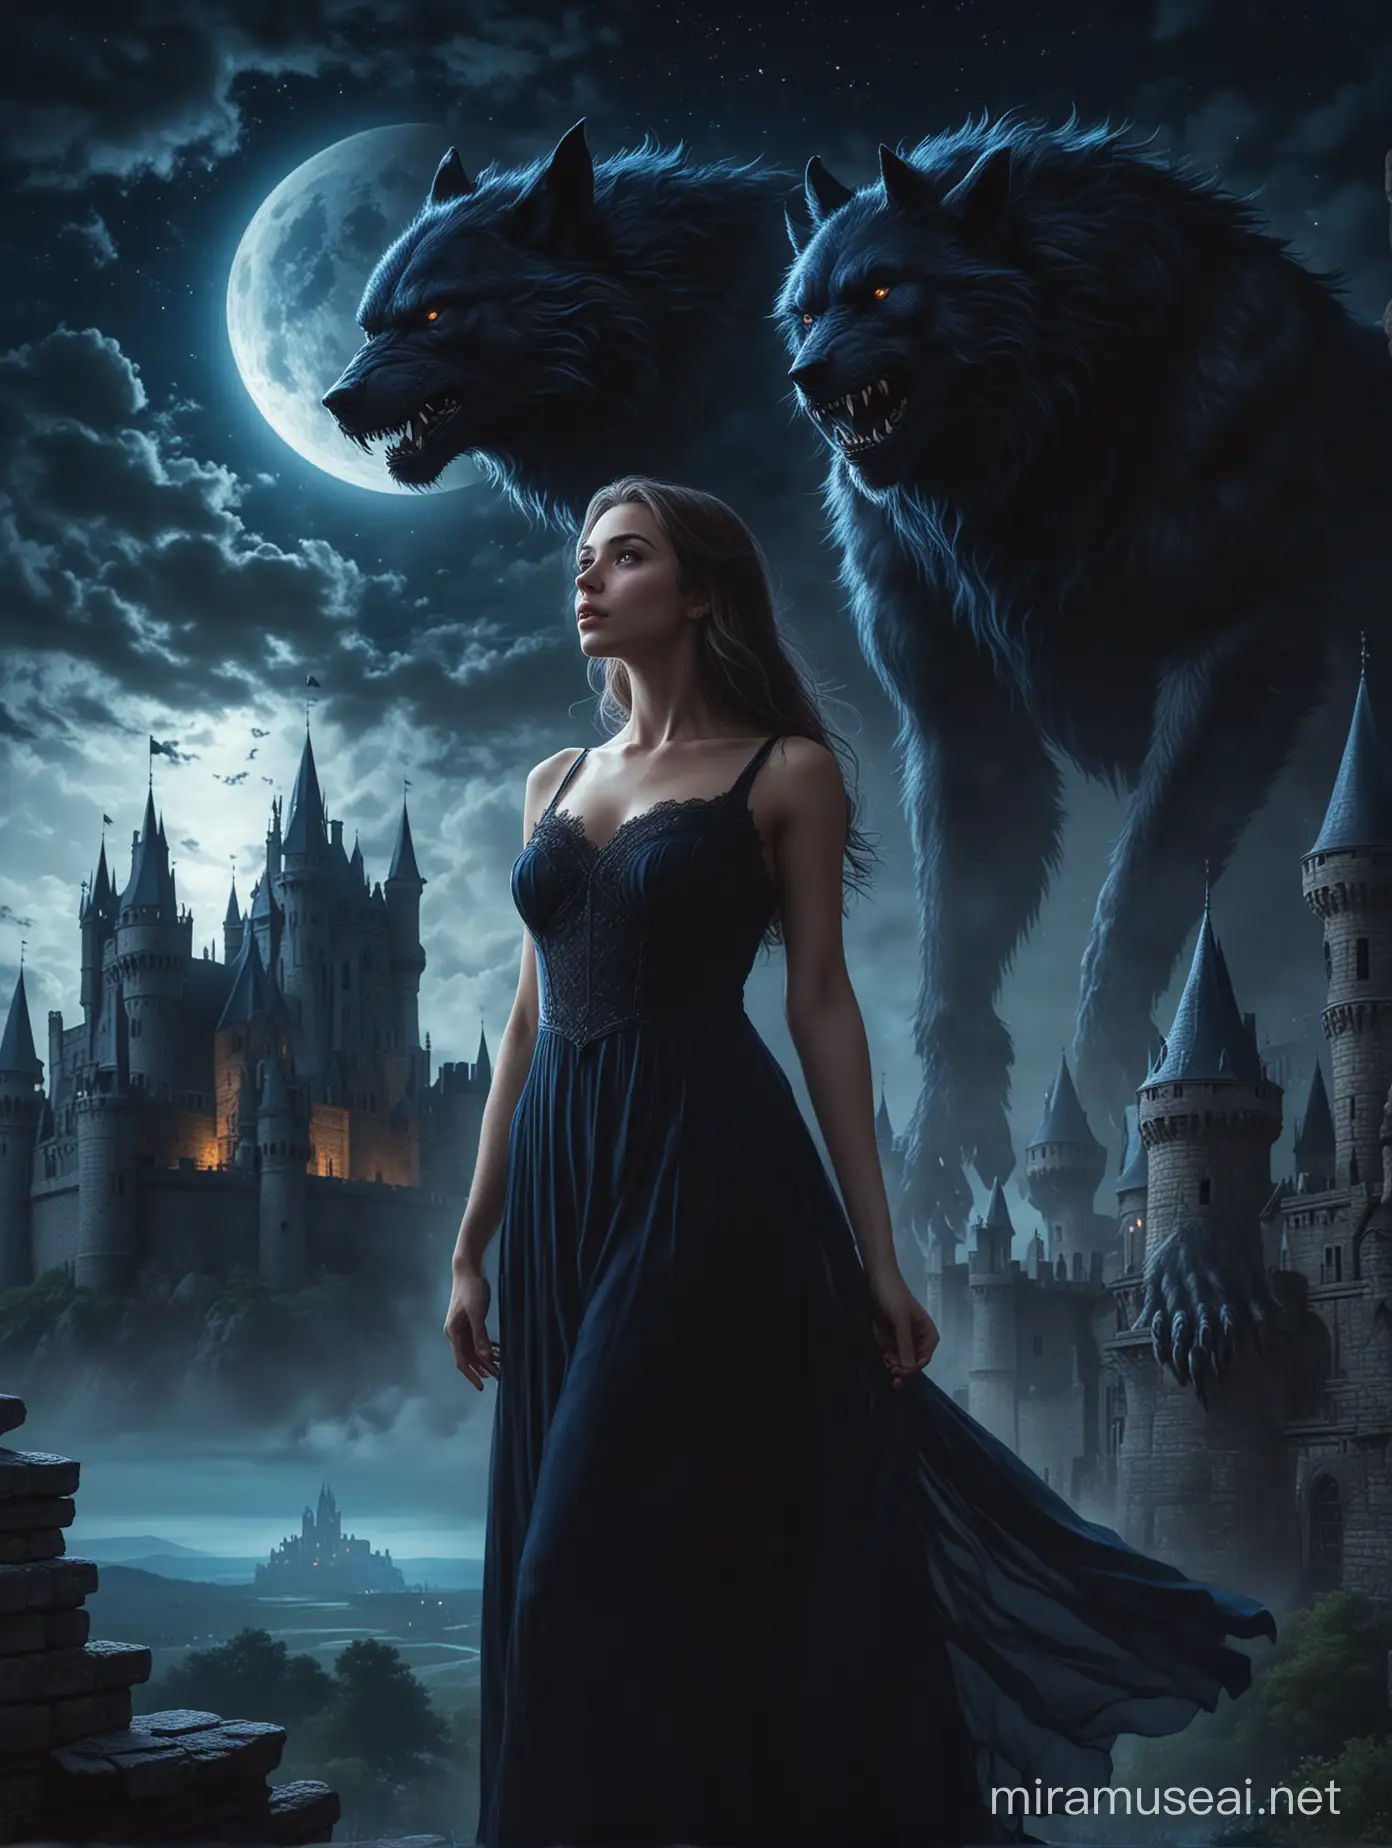 Beautiful innocent lady in a black dress, looking at the sky, with a Mighty werewolf standing behind her, in a luminous deep blue night and a castle behind them